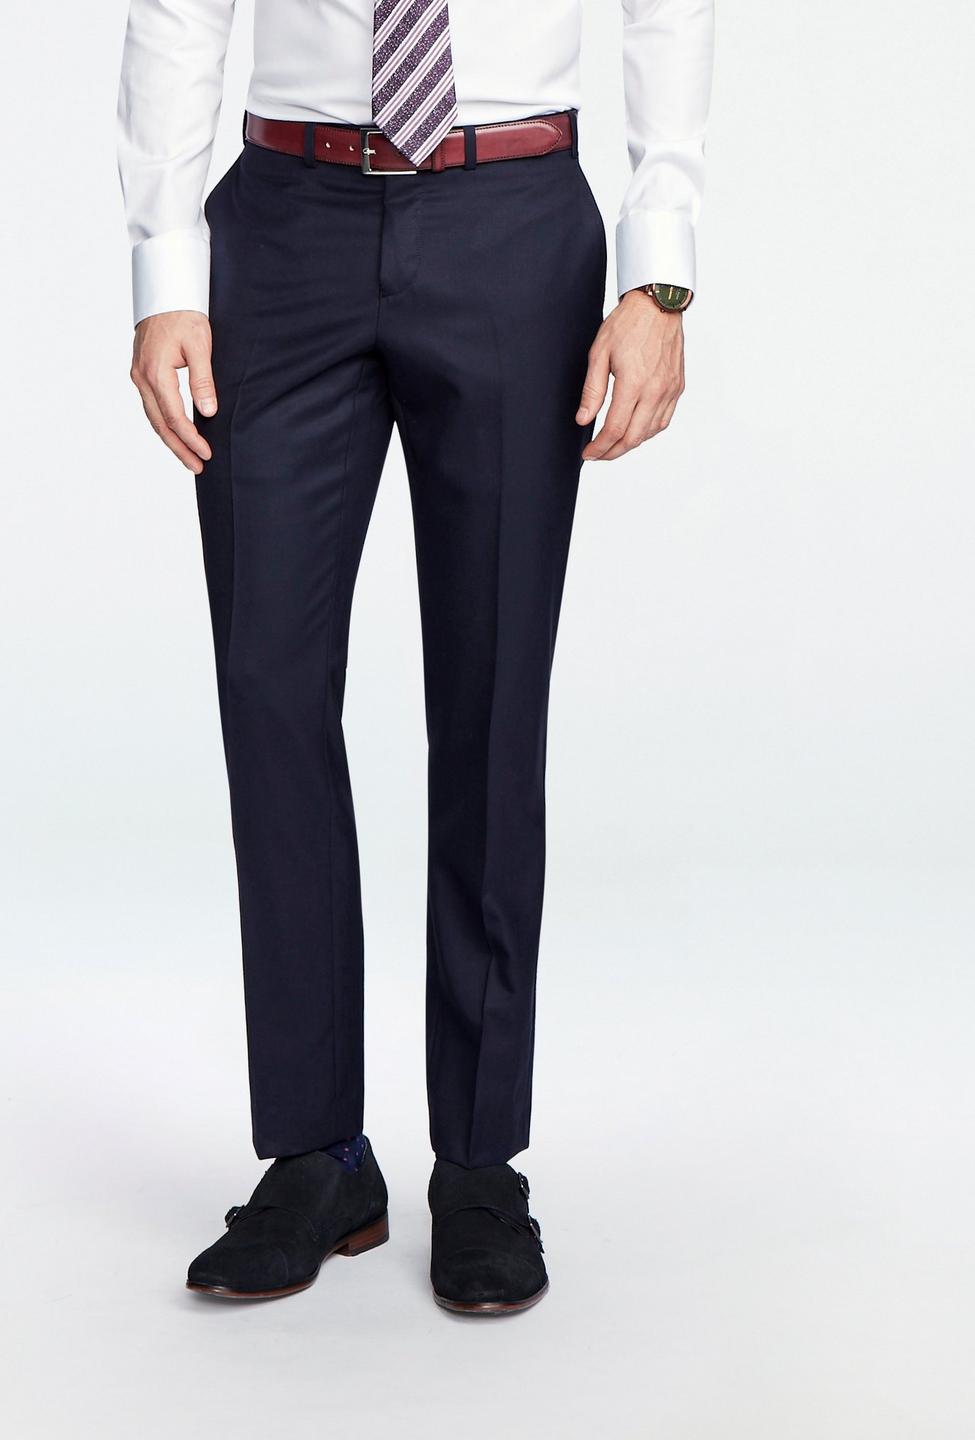 Blue pants - Harrogate Solid Design from Luxury Indochino Collection